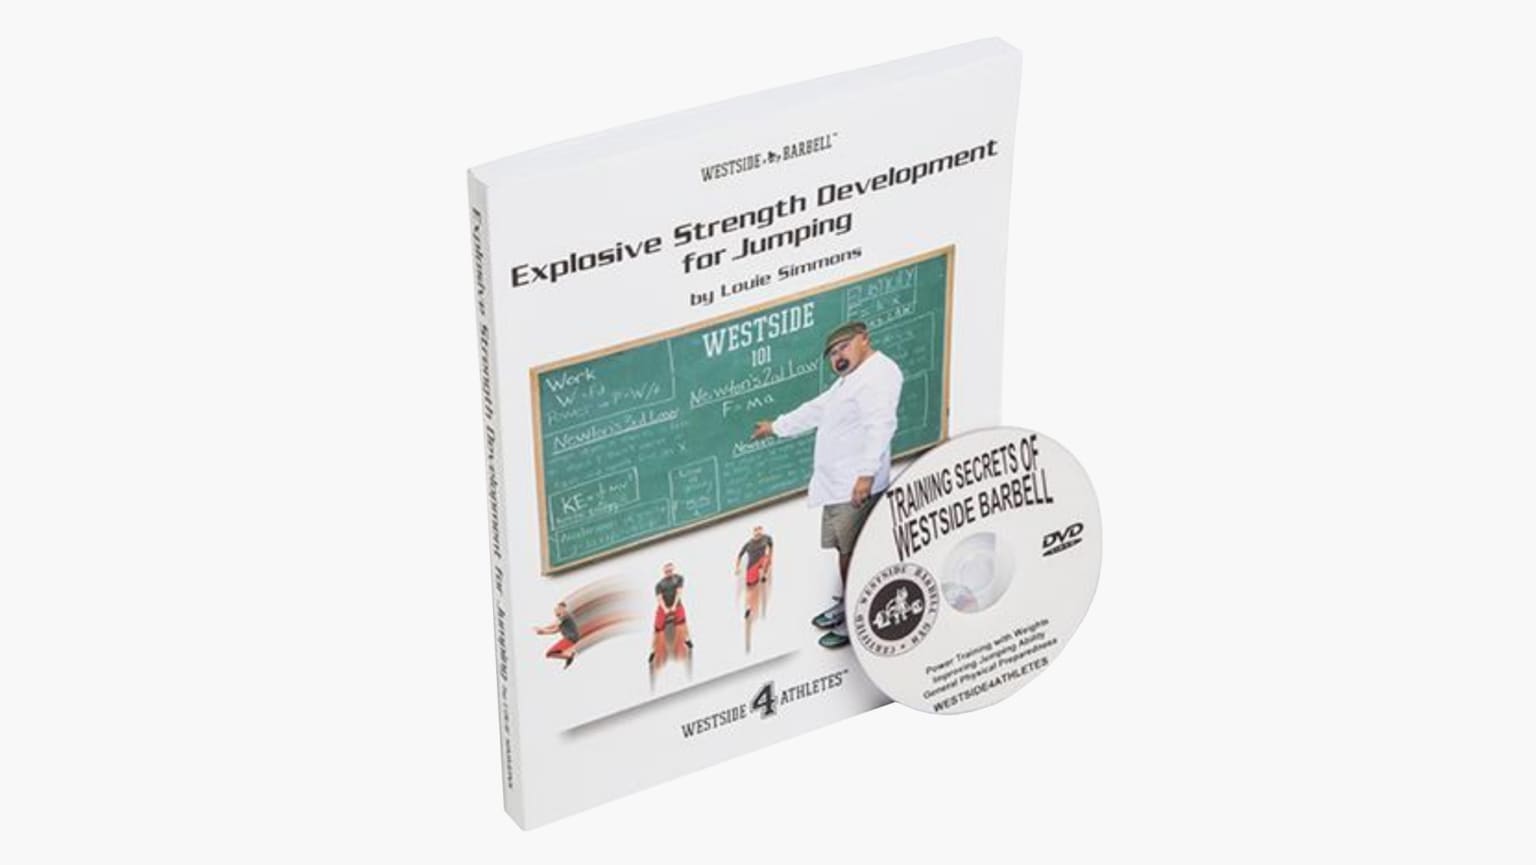 Explosive Strength Development for Jumping by Louie Simmons (DVD Included)